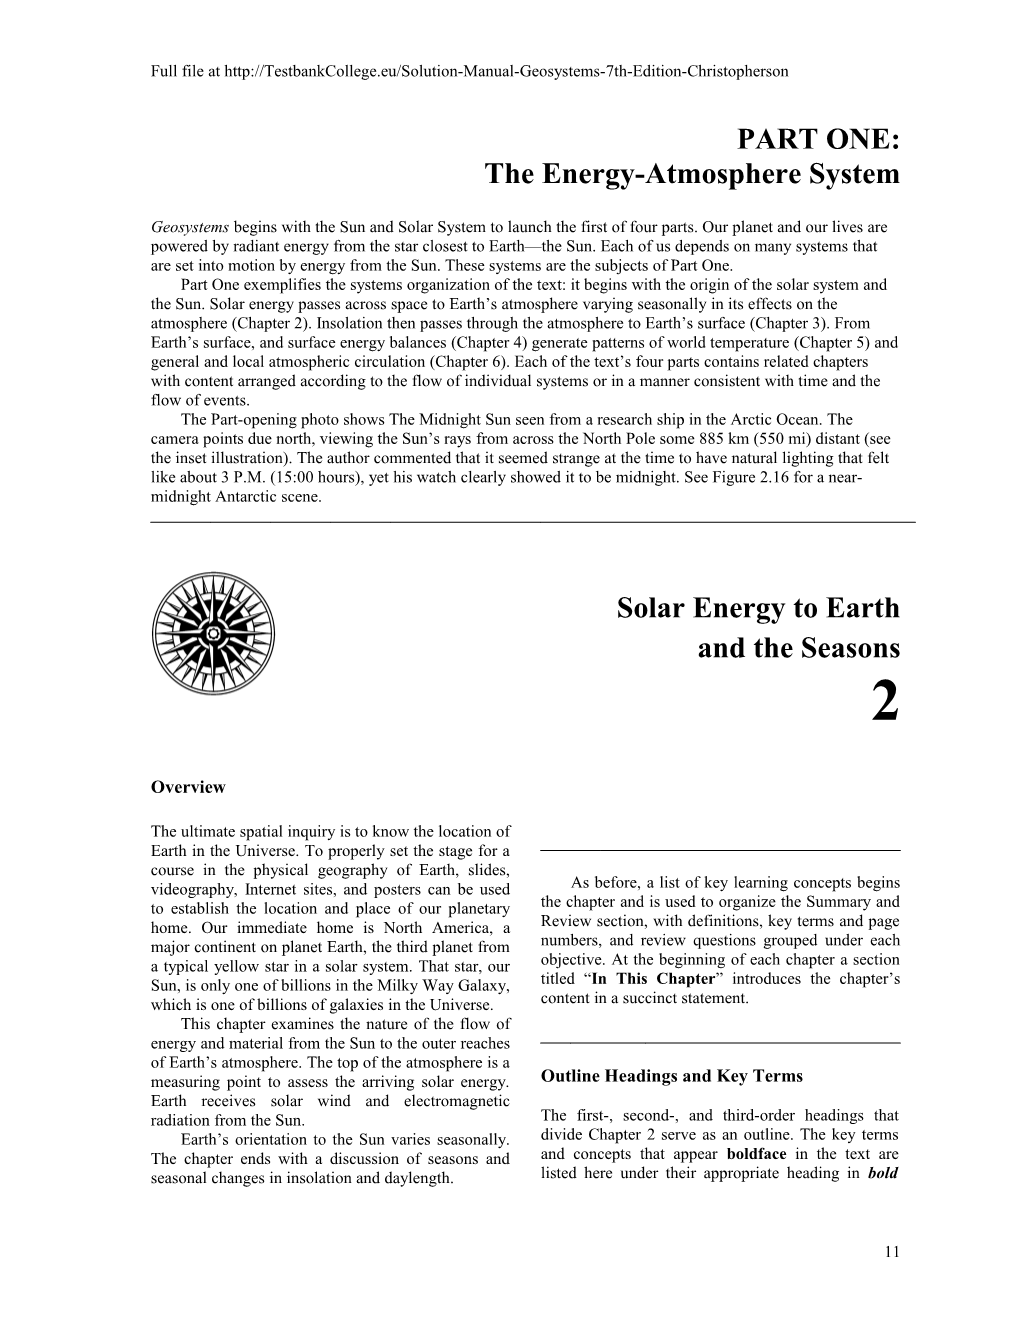 The Energy-Atmosphere System